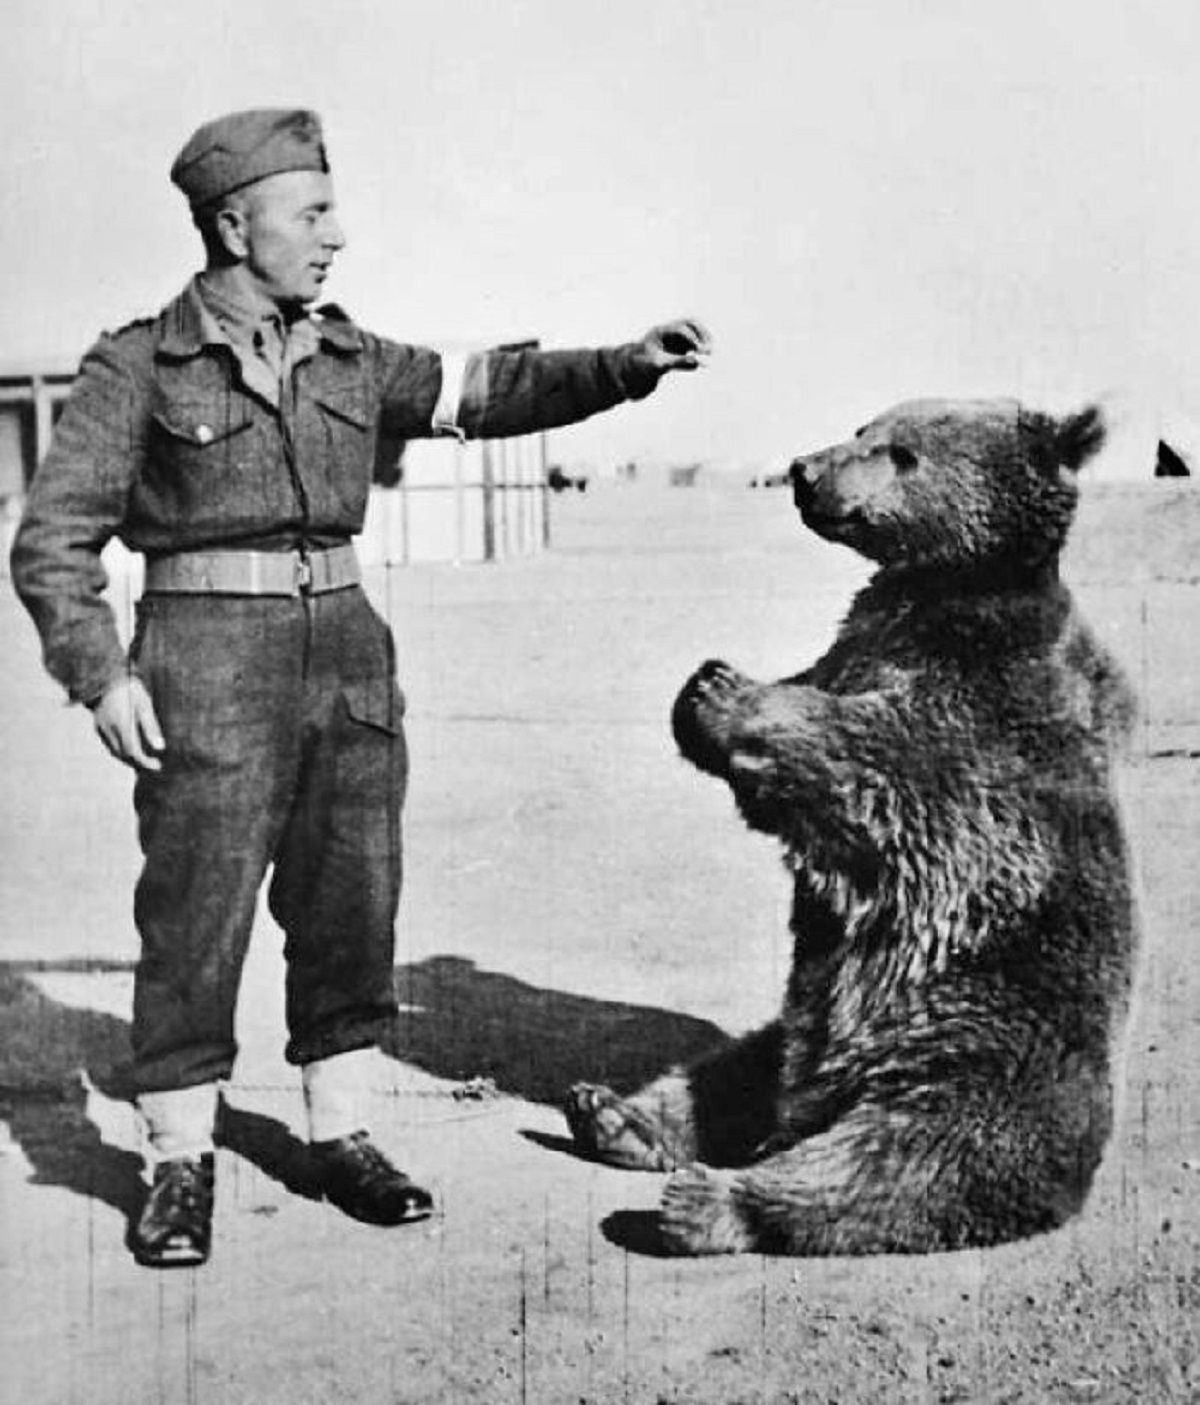 On 8 April, 1942, a detachment of Polish soldiers, deployed to Iran by the Allies, bought a **bear cub** from an Iranian boy. In August the bear was given to the 22nd Artillery Supply company and named Wojtek by the soldiers.


They fed him condensed milk, honey, fruit, and beer, which ended up being his favorite drink. He also picked up smoking, and enjoyed wrestling with his human friends, and bunking in on cold nights.


When the Polish II Corps was redeployed it Italy to fight alongside the British, the Brits wouldn’t transport mere mascots on a troop ship, so Wojtek was formally enrolled in the Polish army as a private.


During the brutal Battle of Monte Cassino Private Wojtek helped keep the guns firing by hauling boxes of ammo, each containing four 25 pound shells. These crates normally took four men to haul. For his bravery and service in battle Wojtek was promoted to Corporal, and his visage became the emblem of the 22nd Artillery Supply Company.


After the war the 22nd was sent to Scotland, before being demobilized, at which point Wojtek was given to the Edinburgh Zoo, where he was often visited by Polish soldiers until his death in 1963.